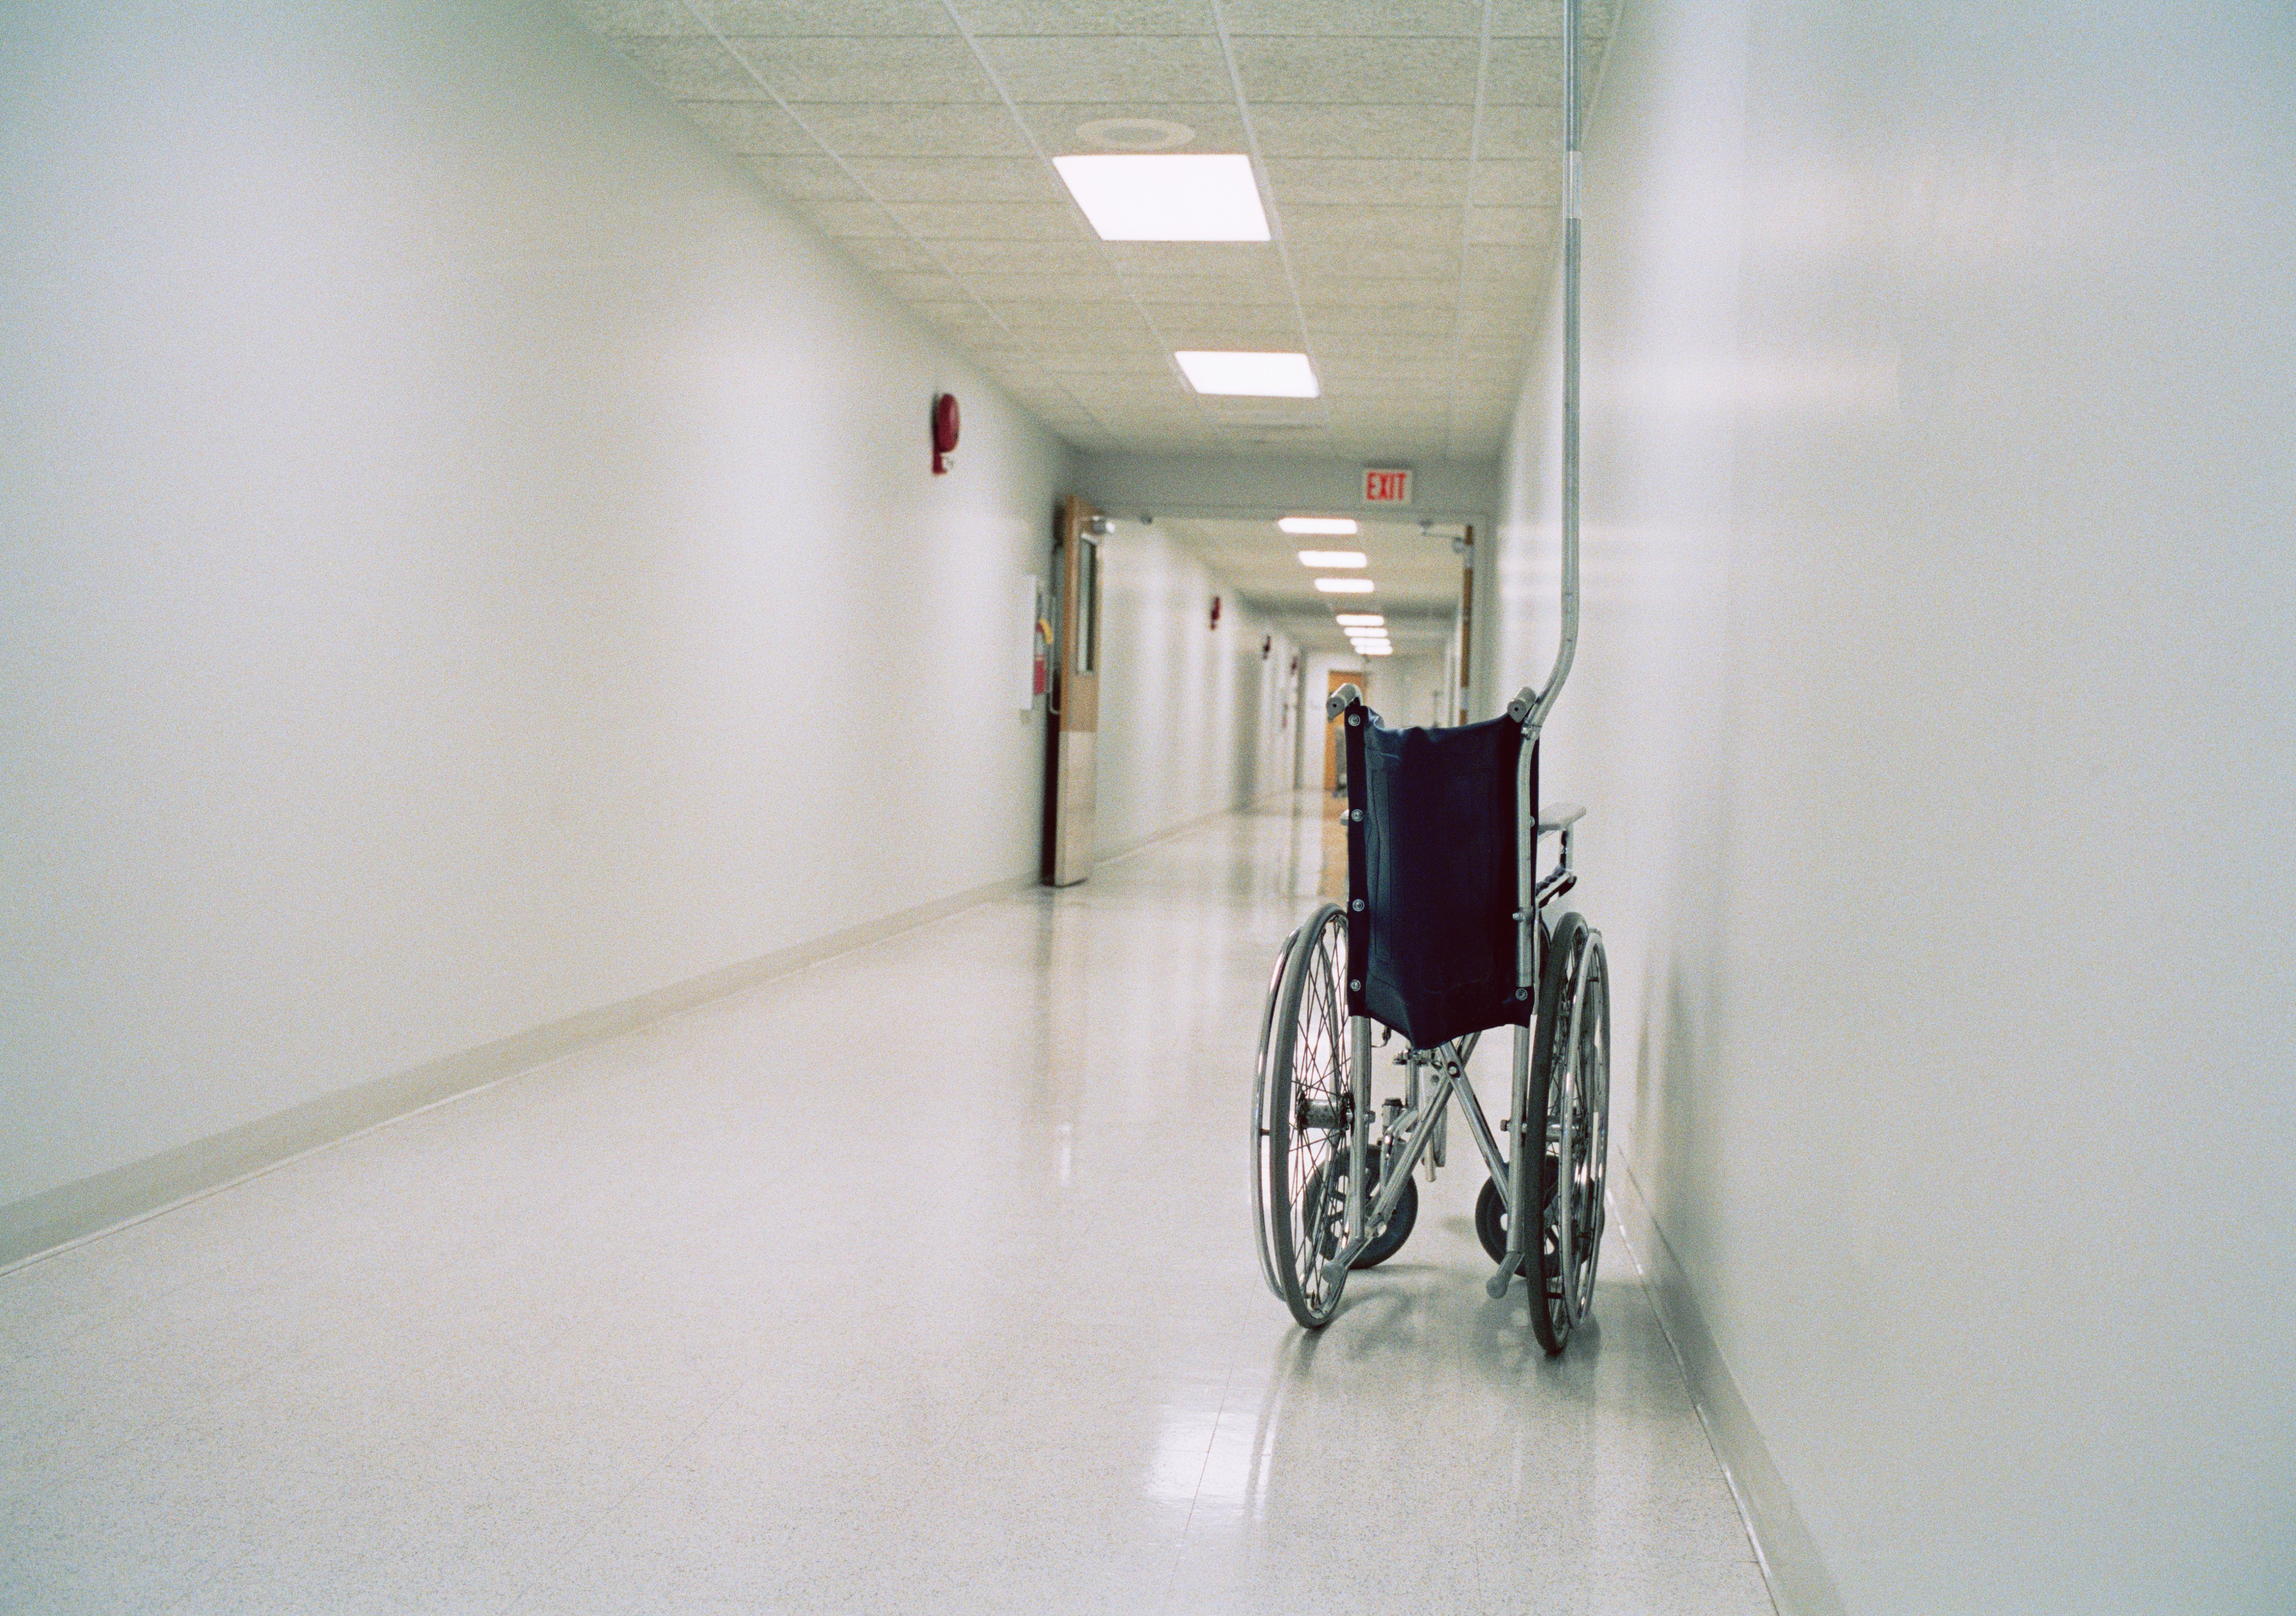 Collapsible wheelchair in empty corridor of hospital (Reza Estakhrian—Getty Images)